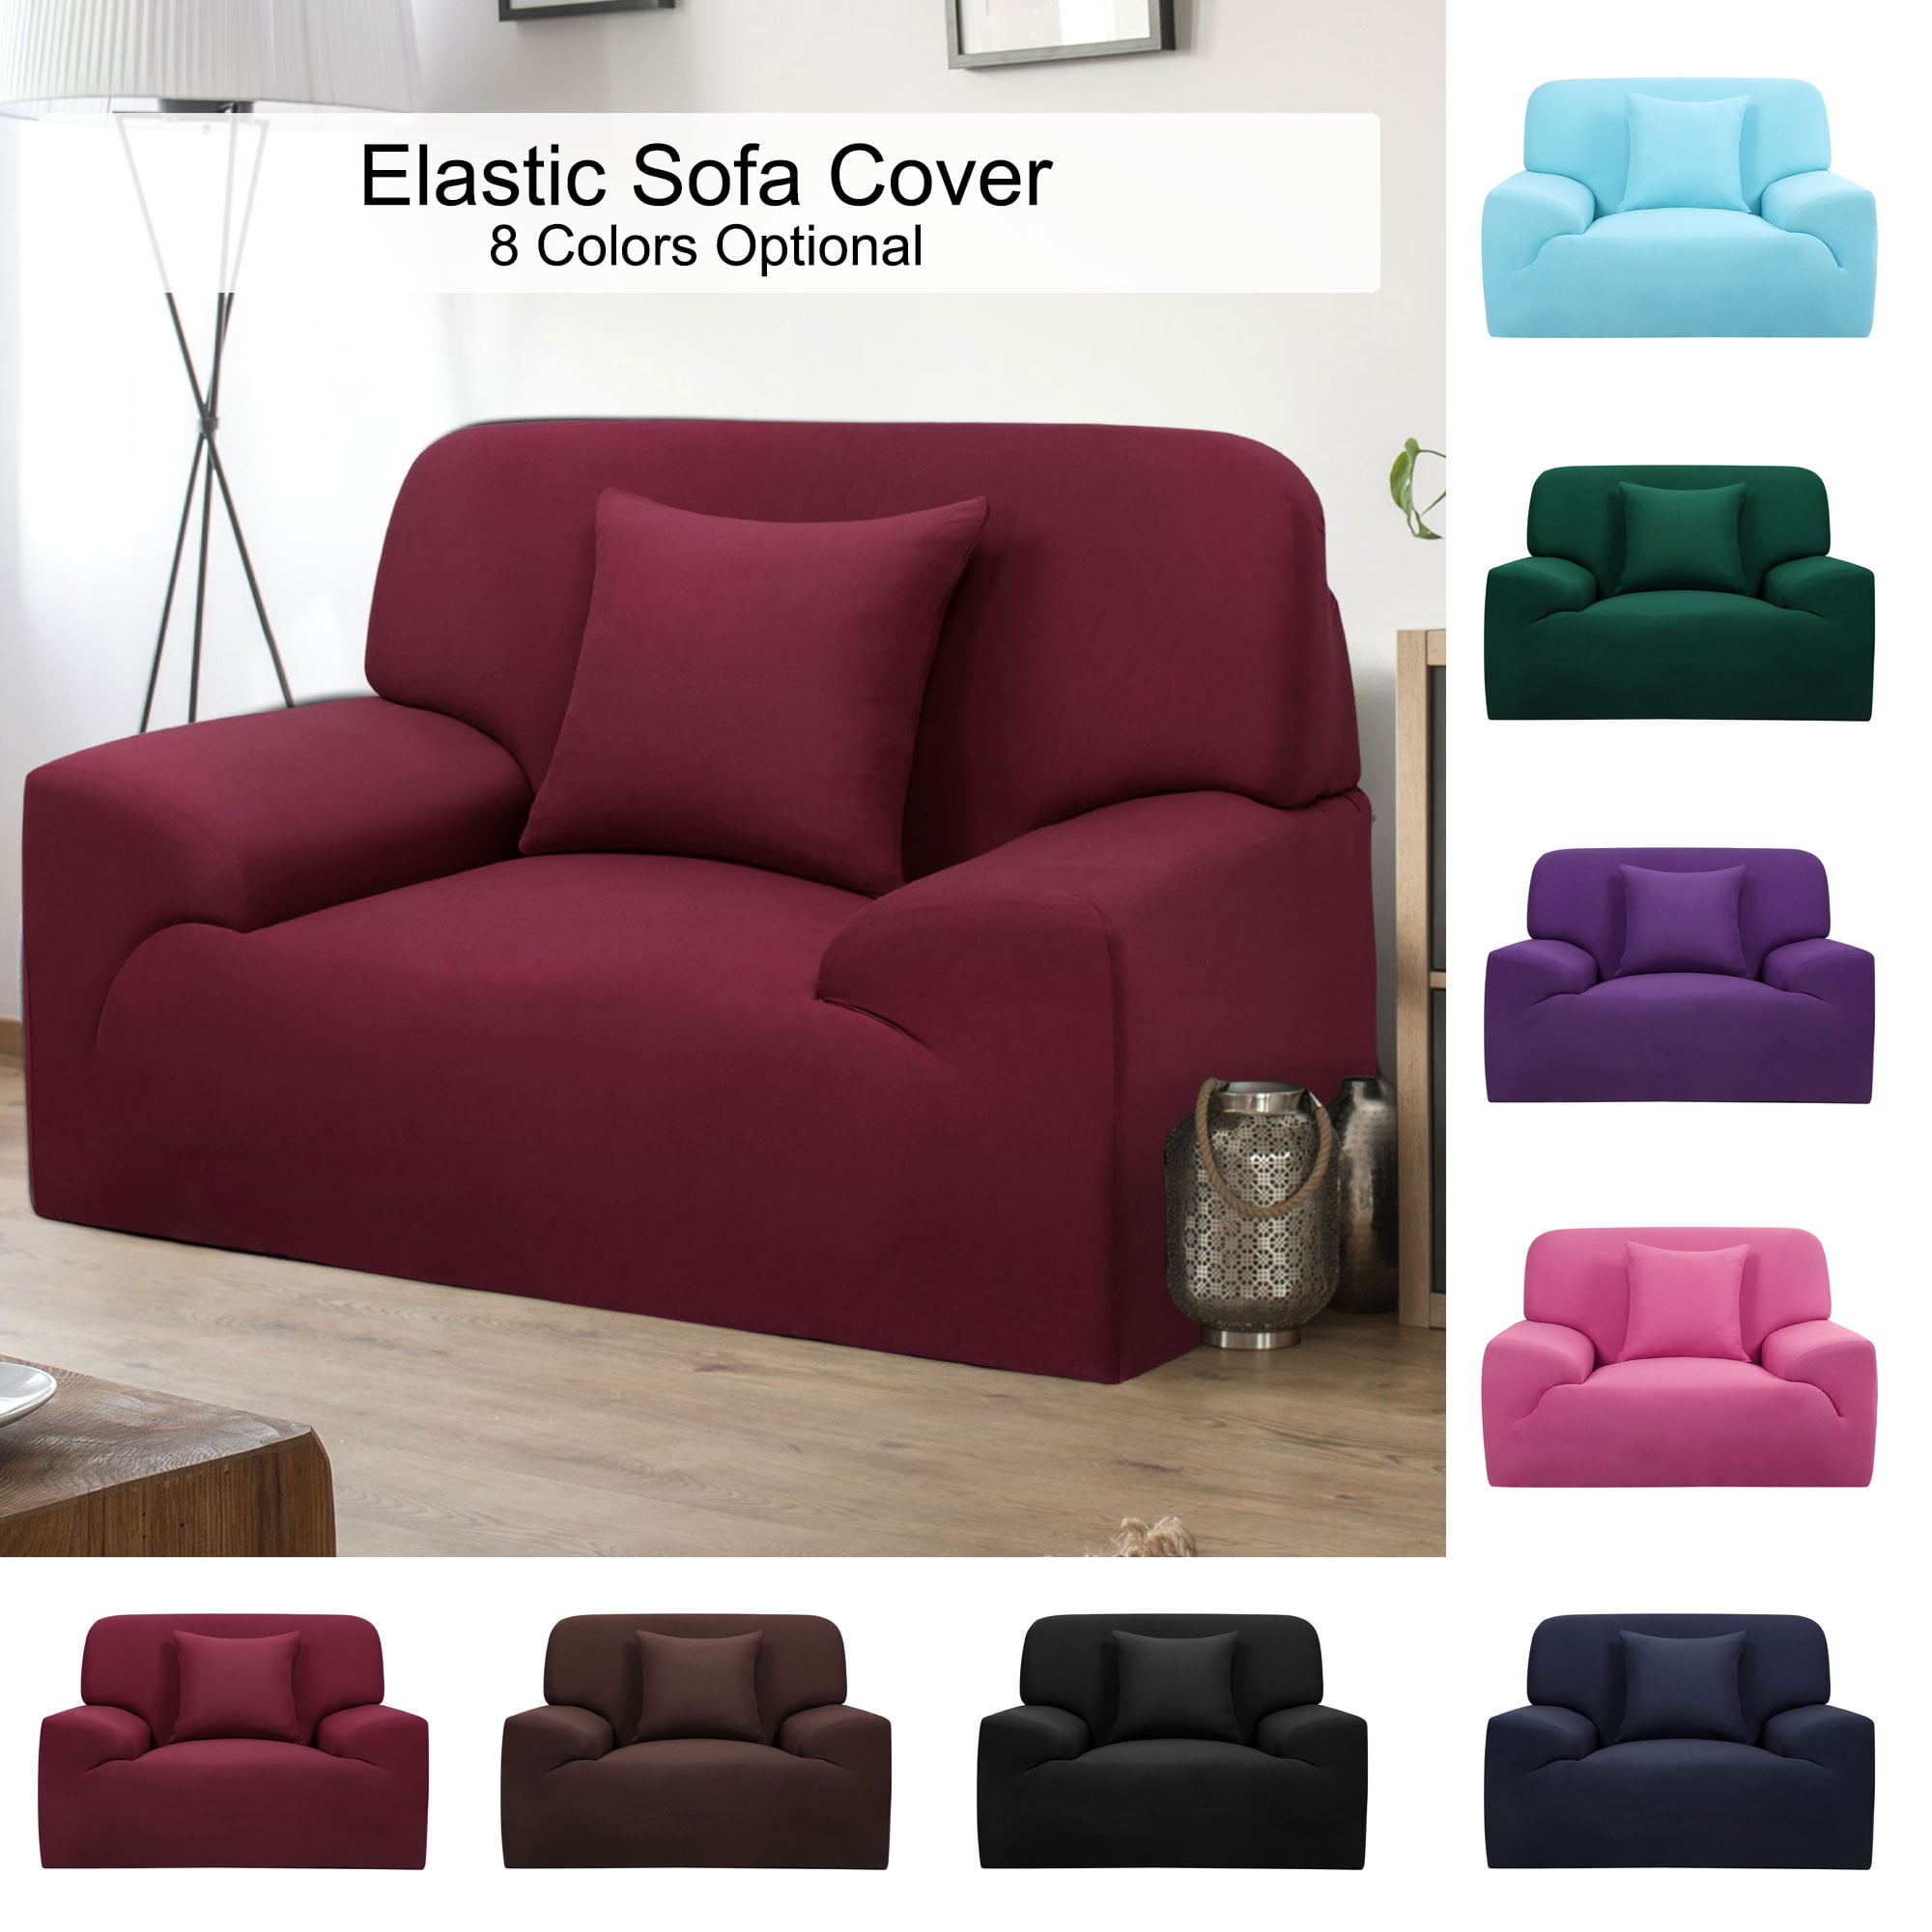 1/2/3/4 Seater Stretch Sofa Cover Elastic Lounge Recliner Slipcover Protector AU 